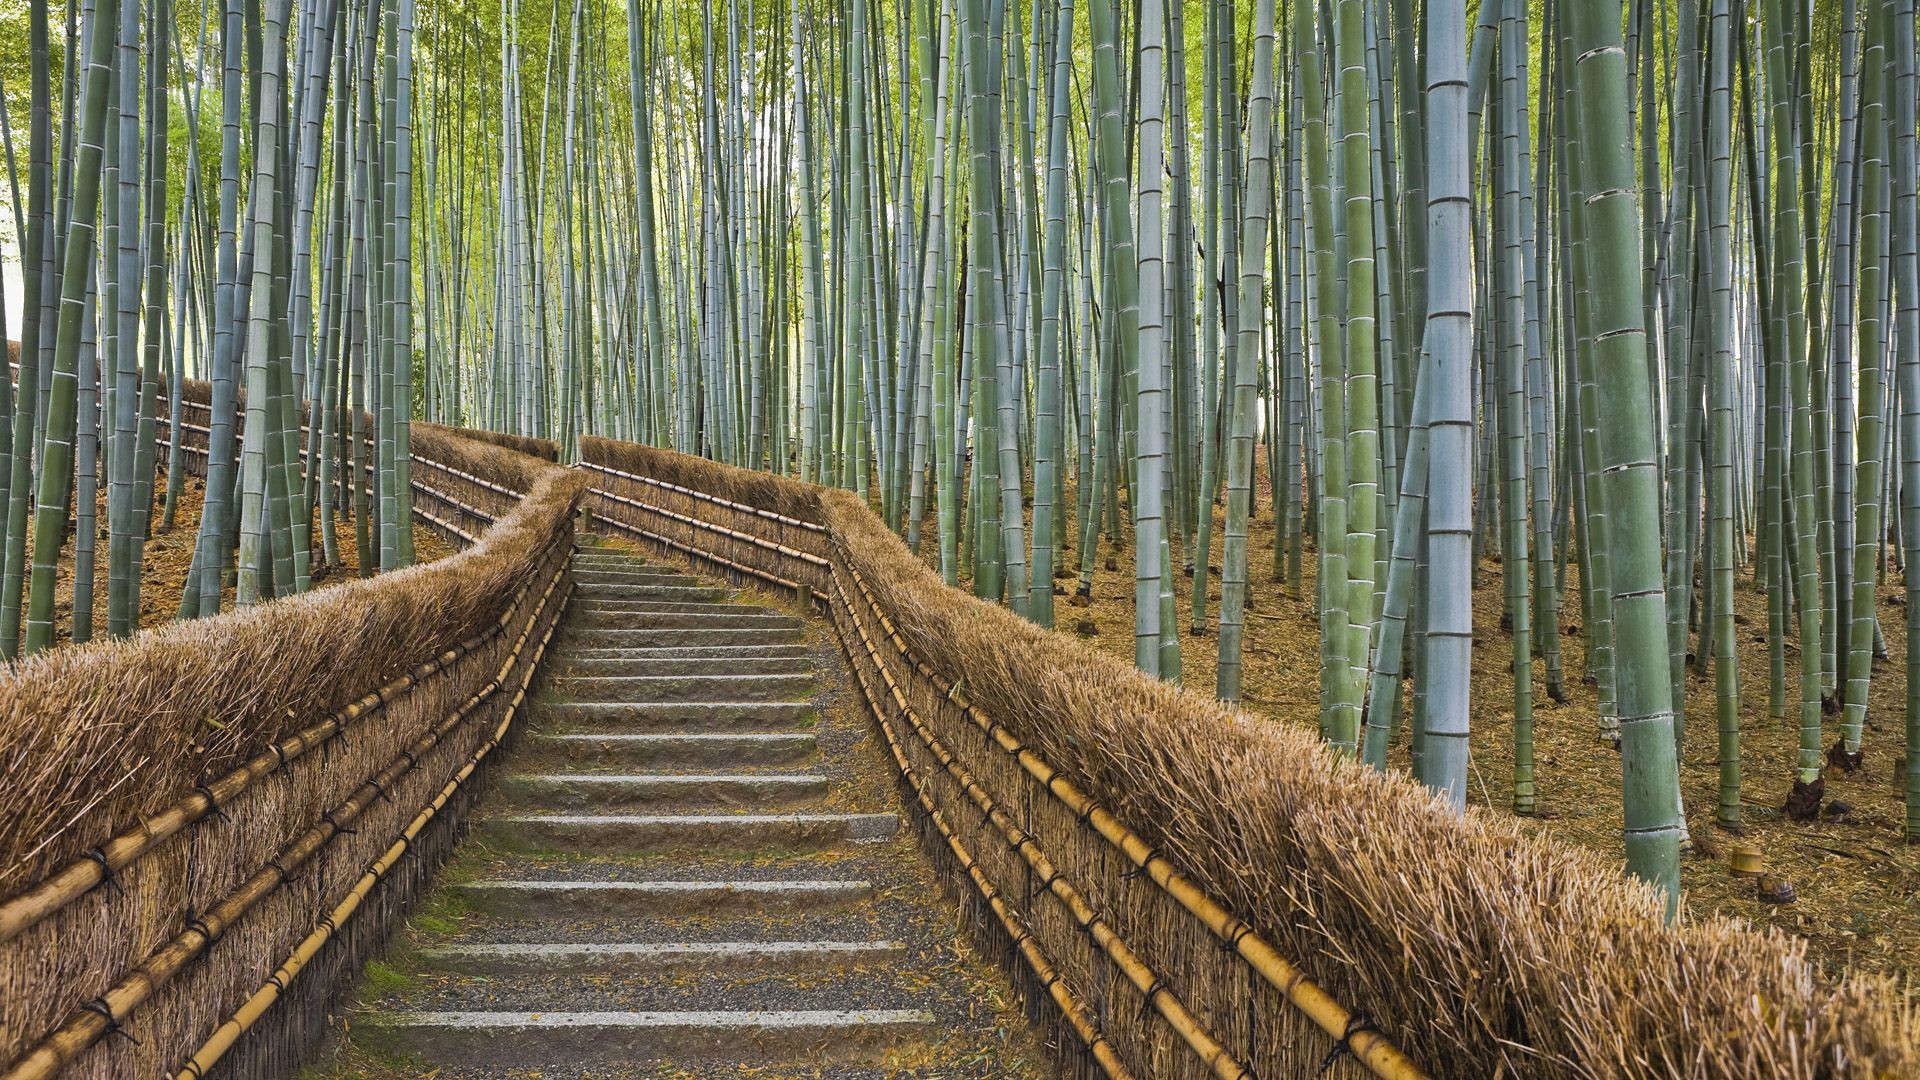 1920x1080 Stairs through the bamboo forest, Kyoto wallpaper - 1215727